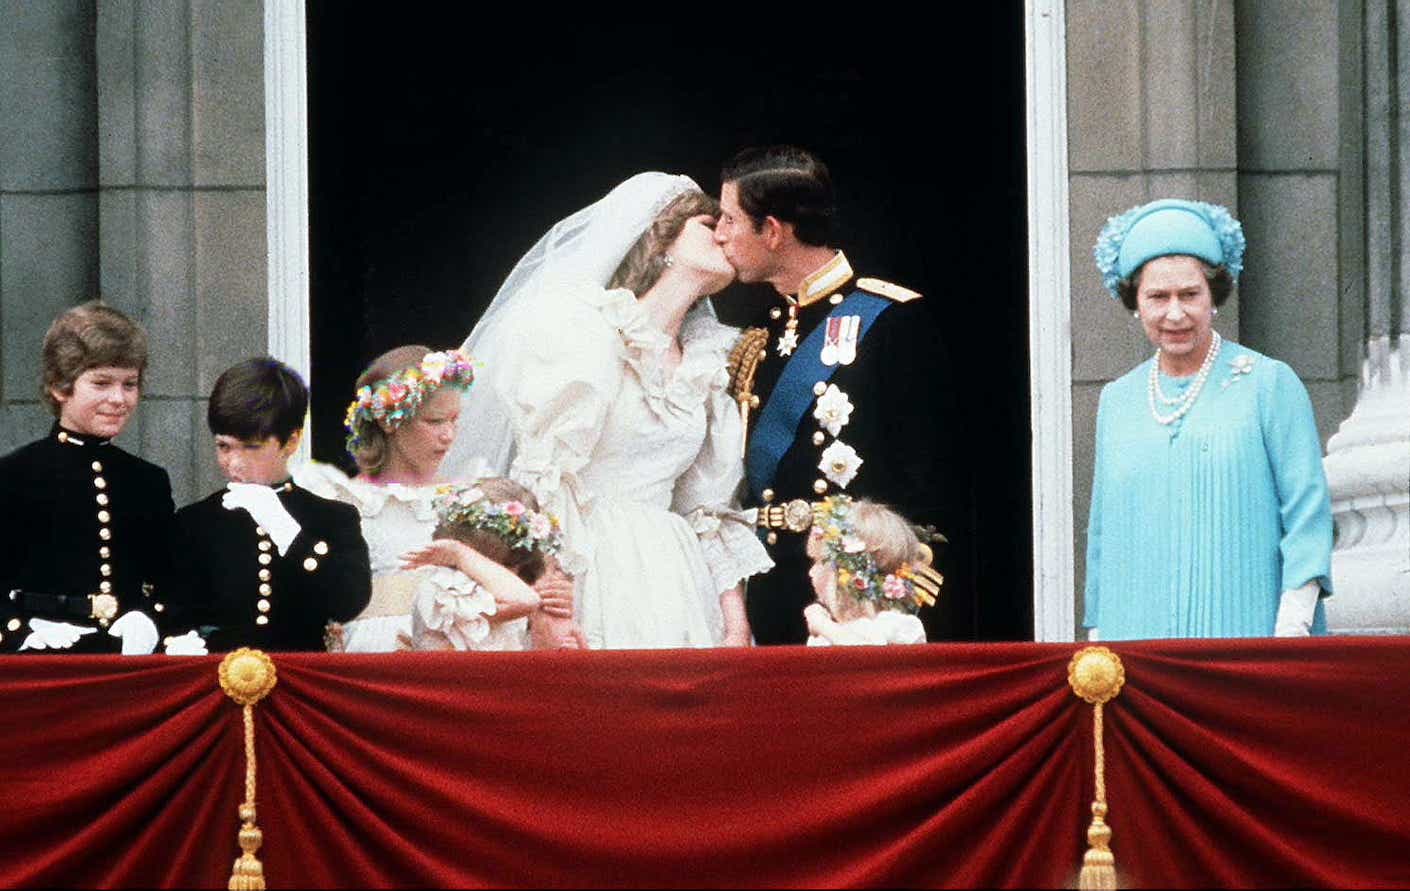 During their 1981 wedding, Prince Charles And Princess Diana kiss on the balcony of Buckingham Palace while Queen Elizabeth II stands to the side. Diana wears a long white wedding dress.